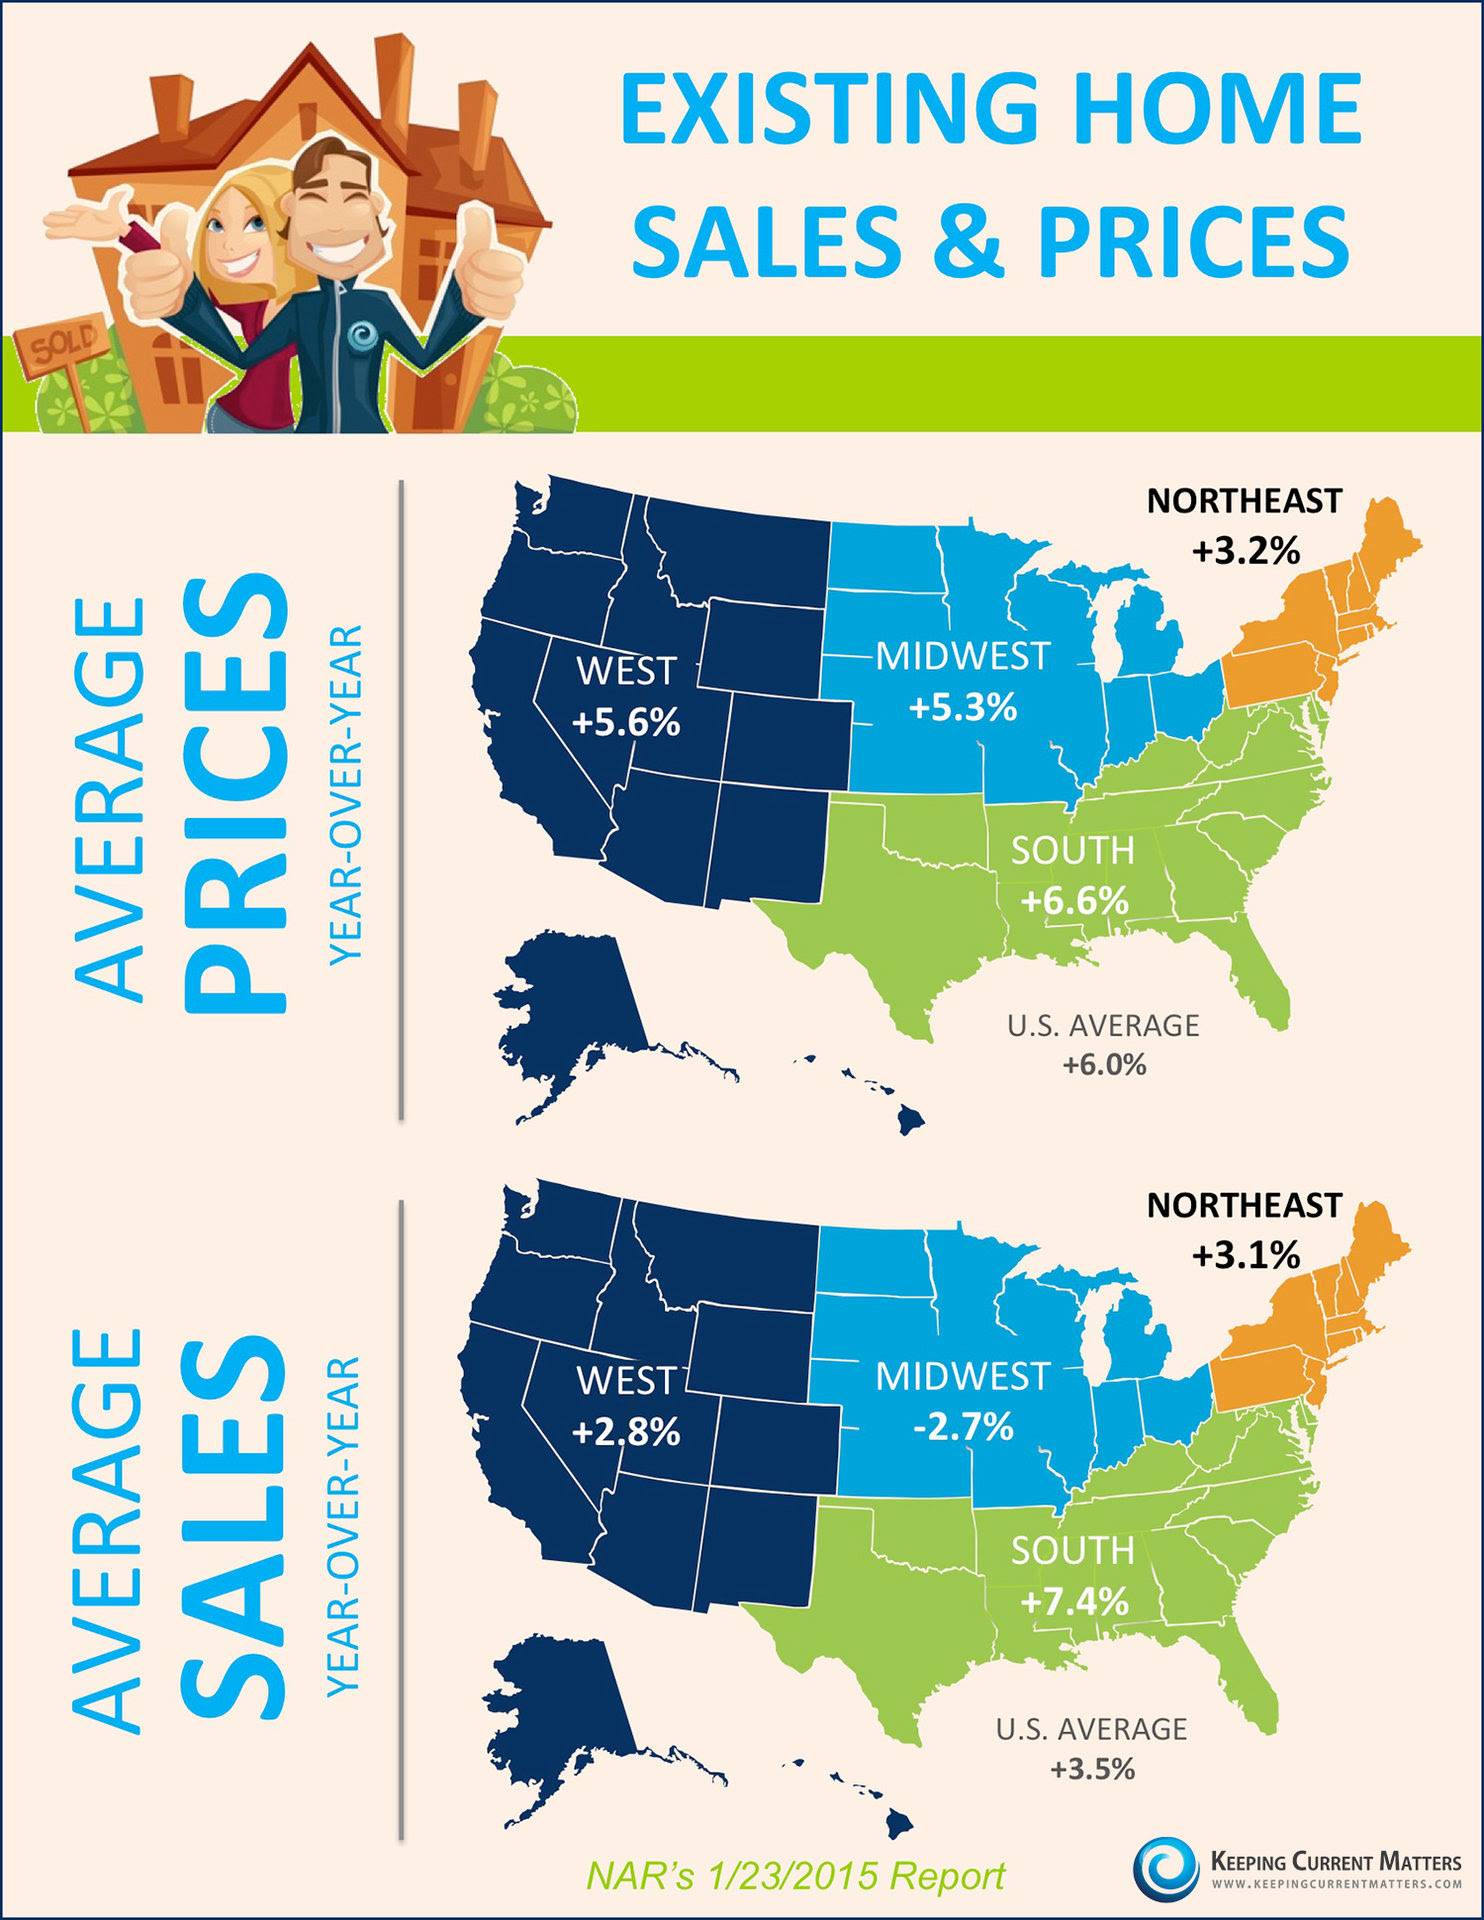 Existing Home Sales & Prices [INFOGRAPHIC] | Keeping Current Matters